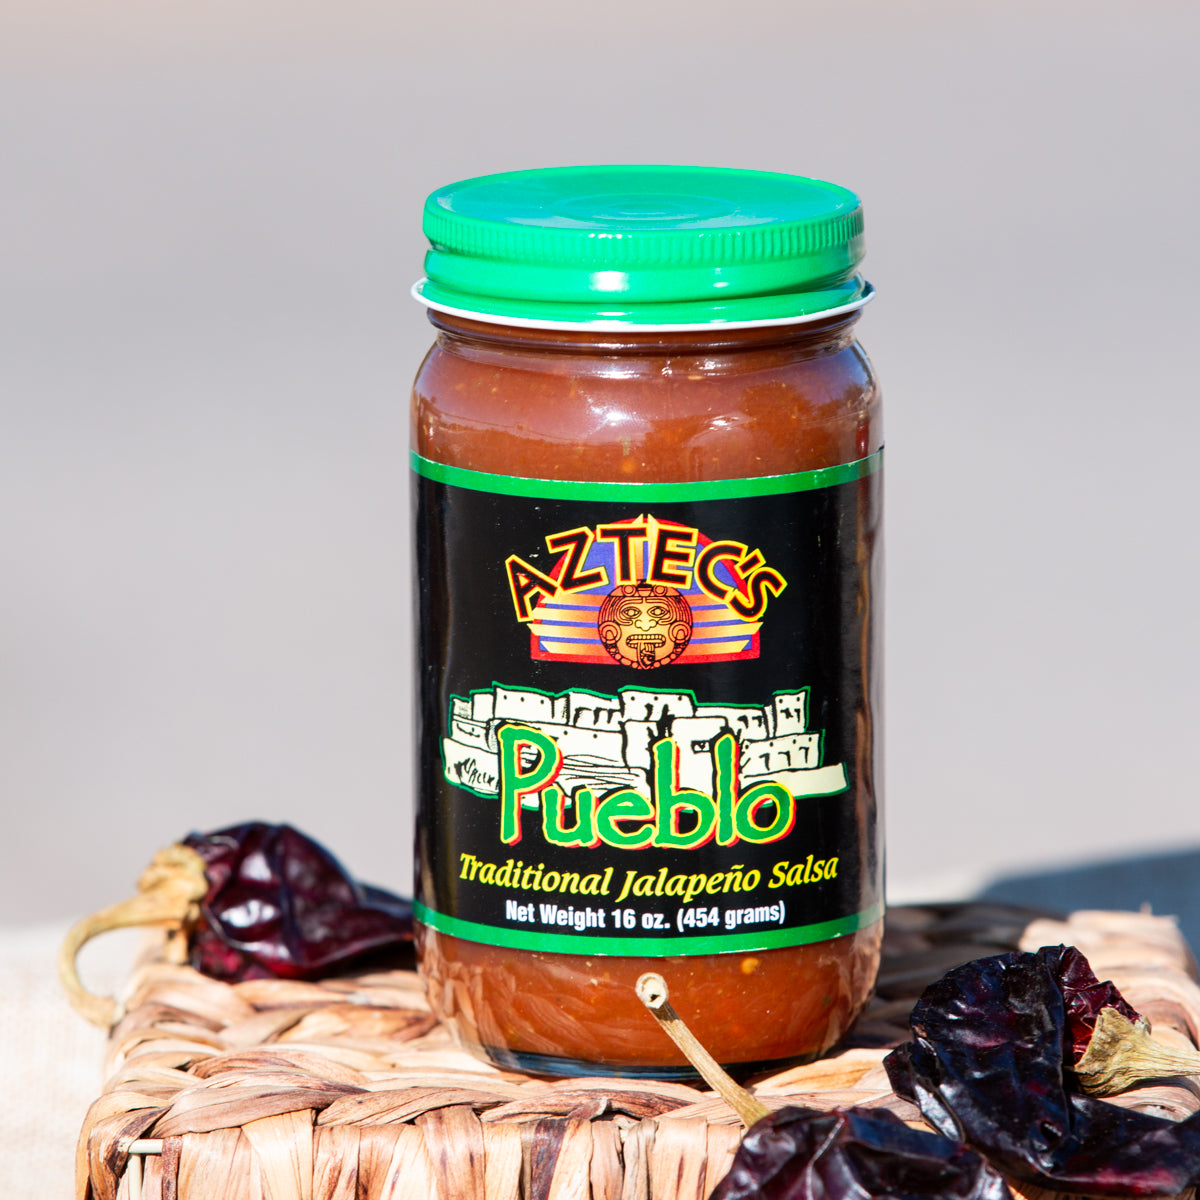 A jar of Aztec Pueblo Salsa on a woven basket, with dried chili peppers around it, set against a neutral backdrop.